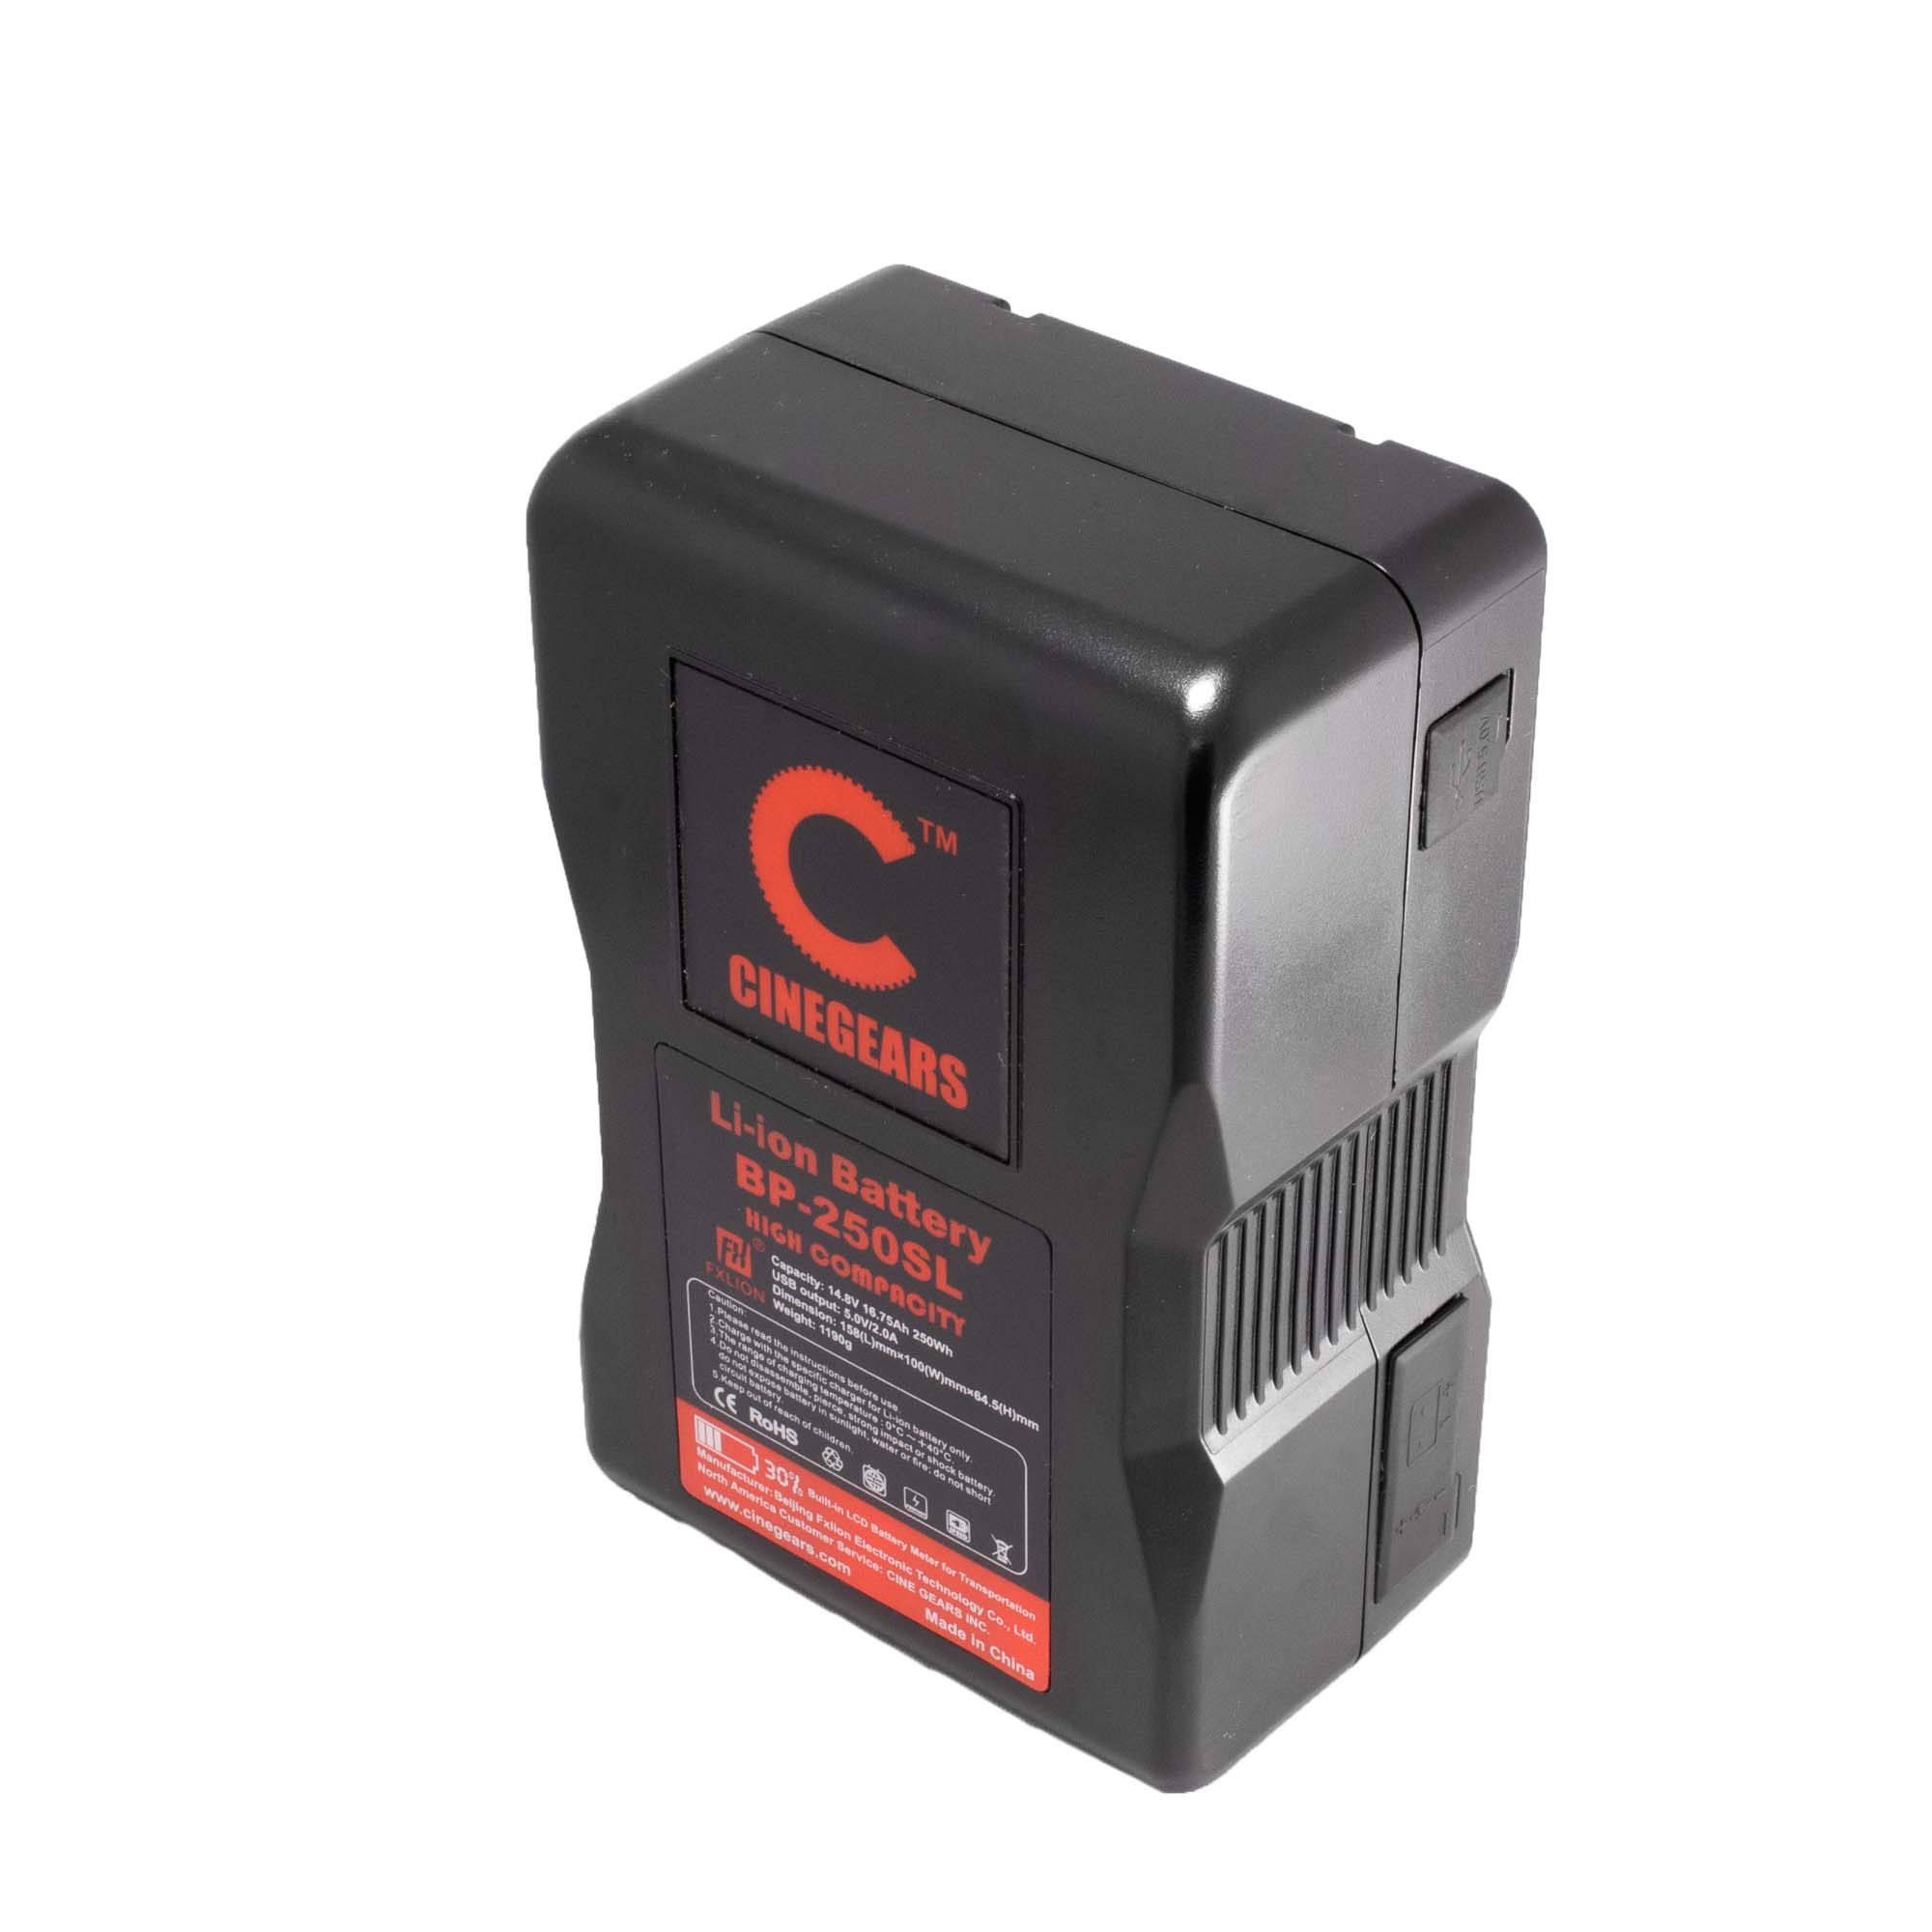 CINEGEARS 250Wh High-Capacity V- Mount Battery